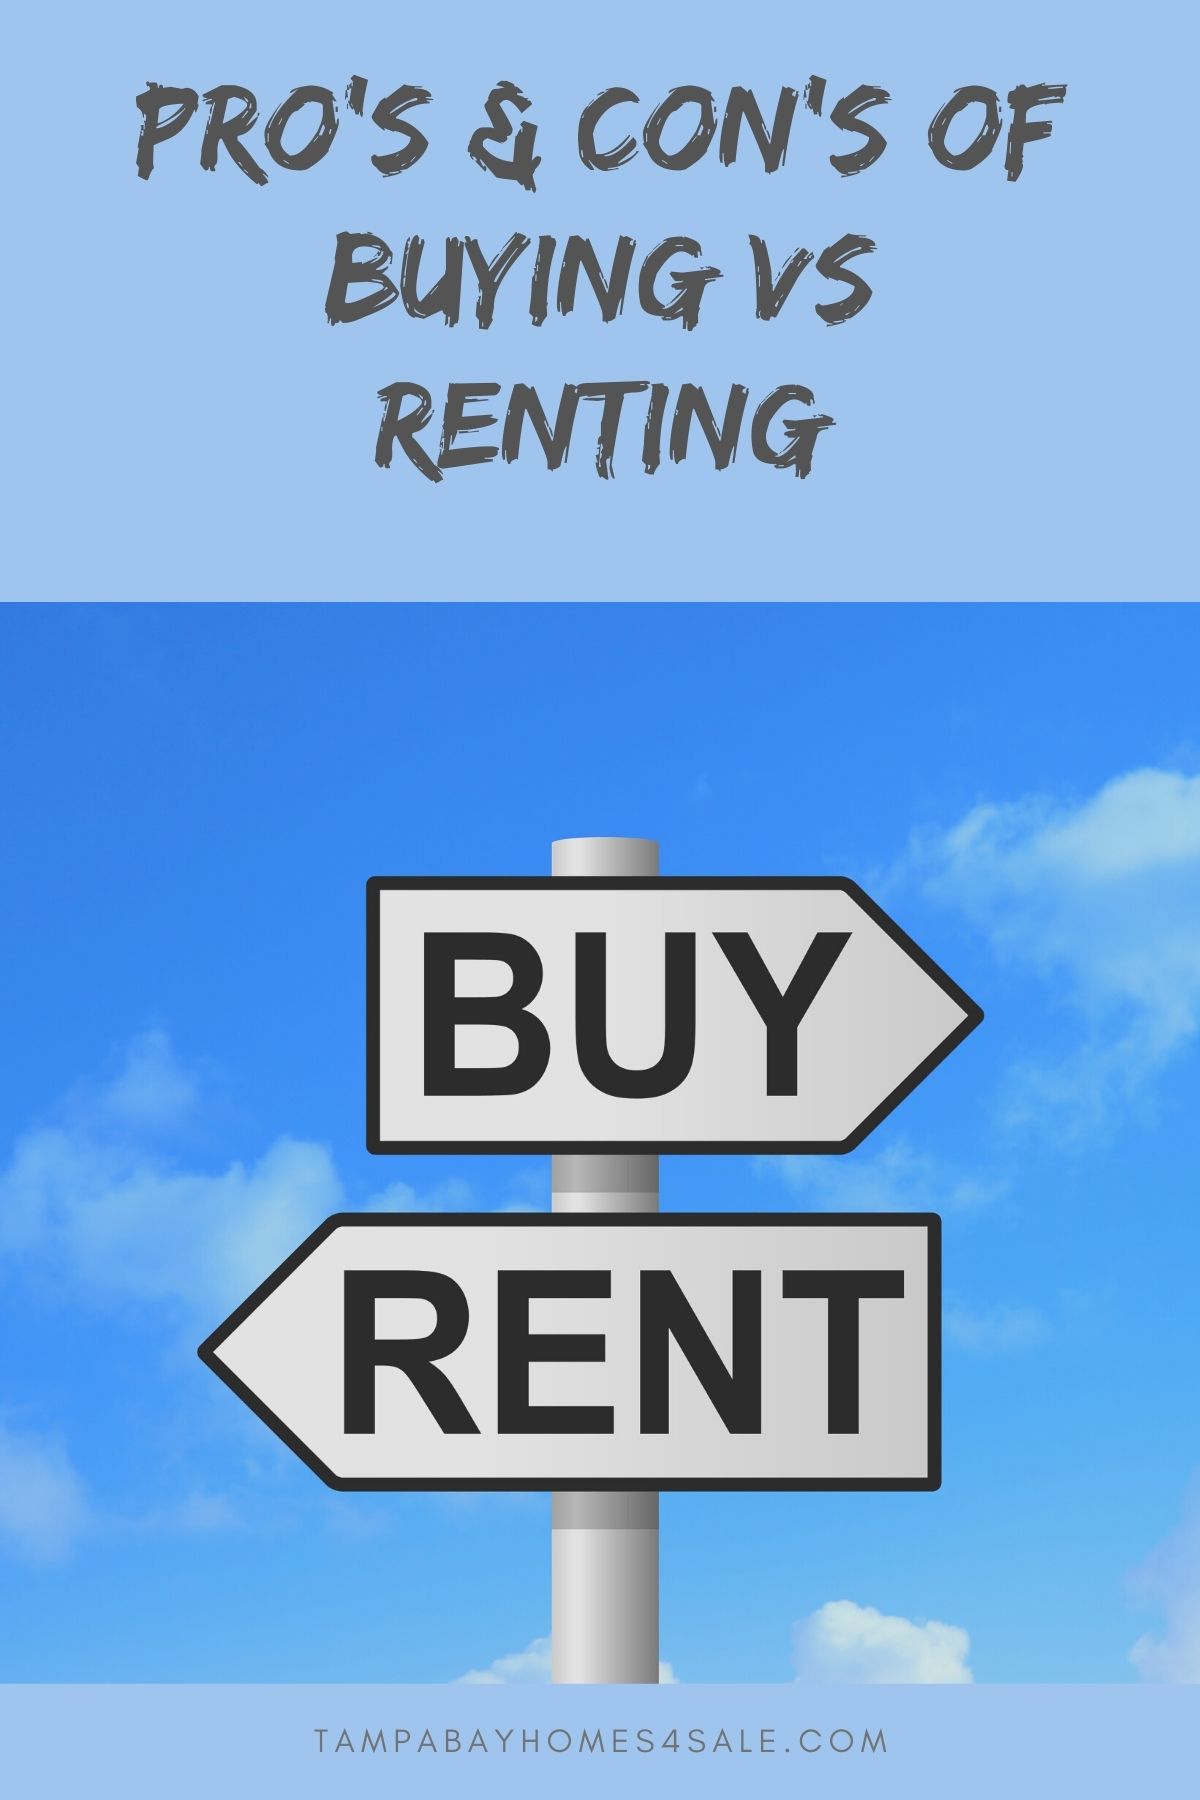 Pro's & Con's of Buying vs Renting